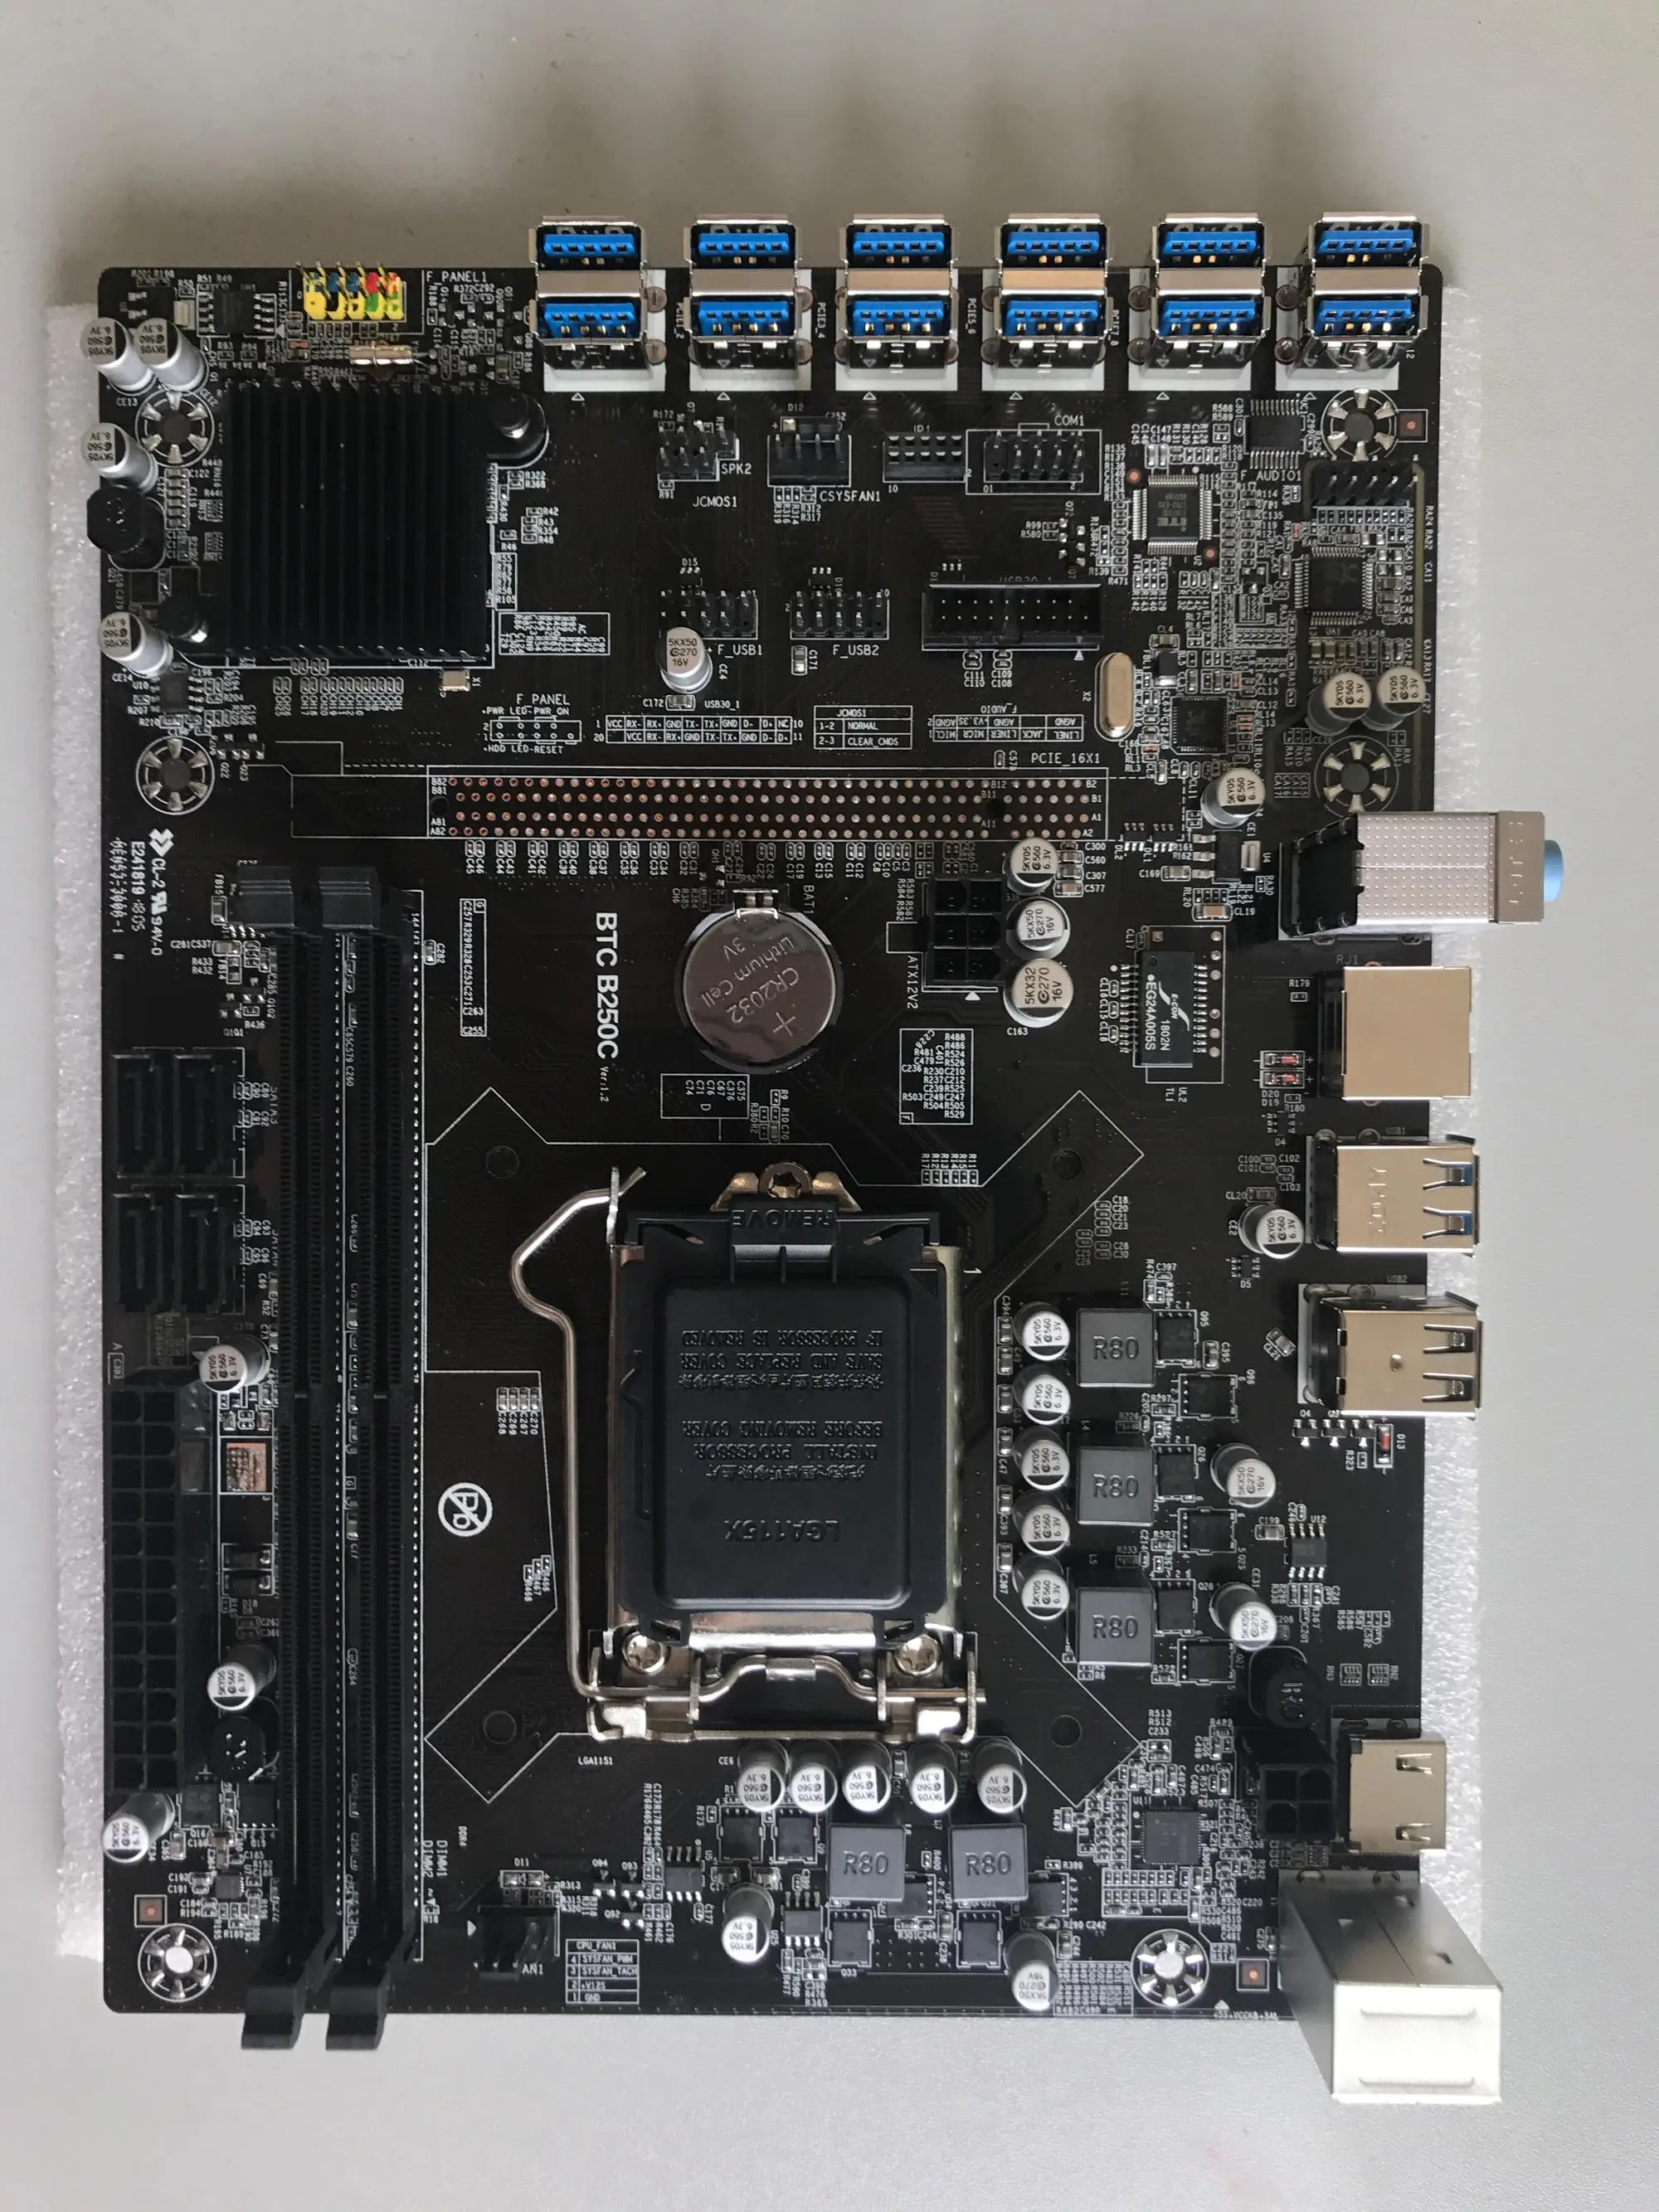 motherboard for ethereum mining